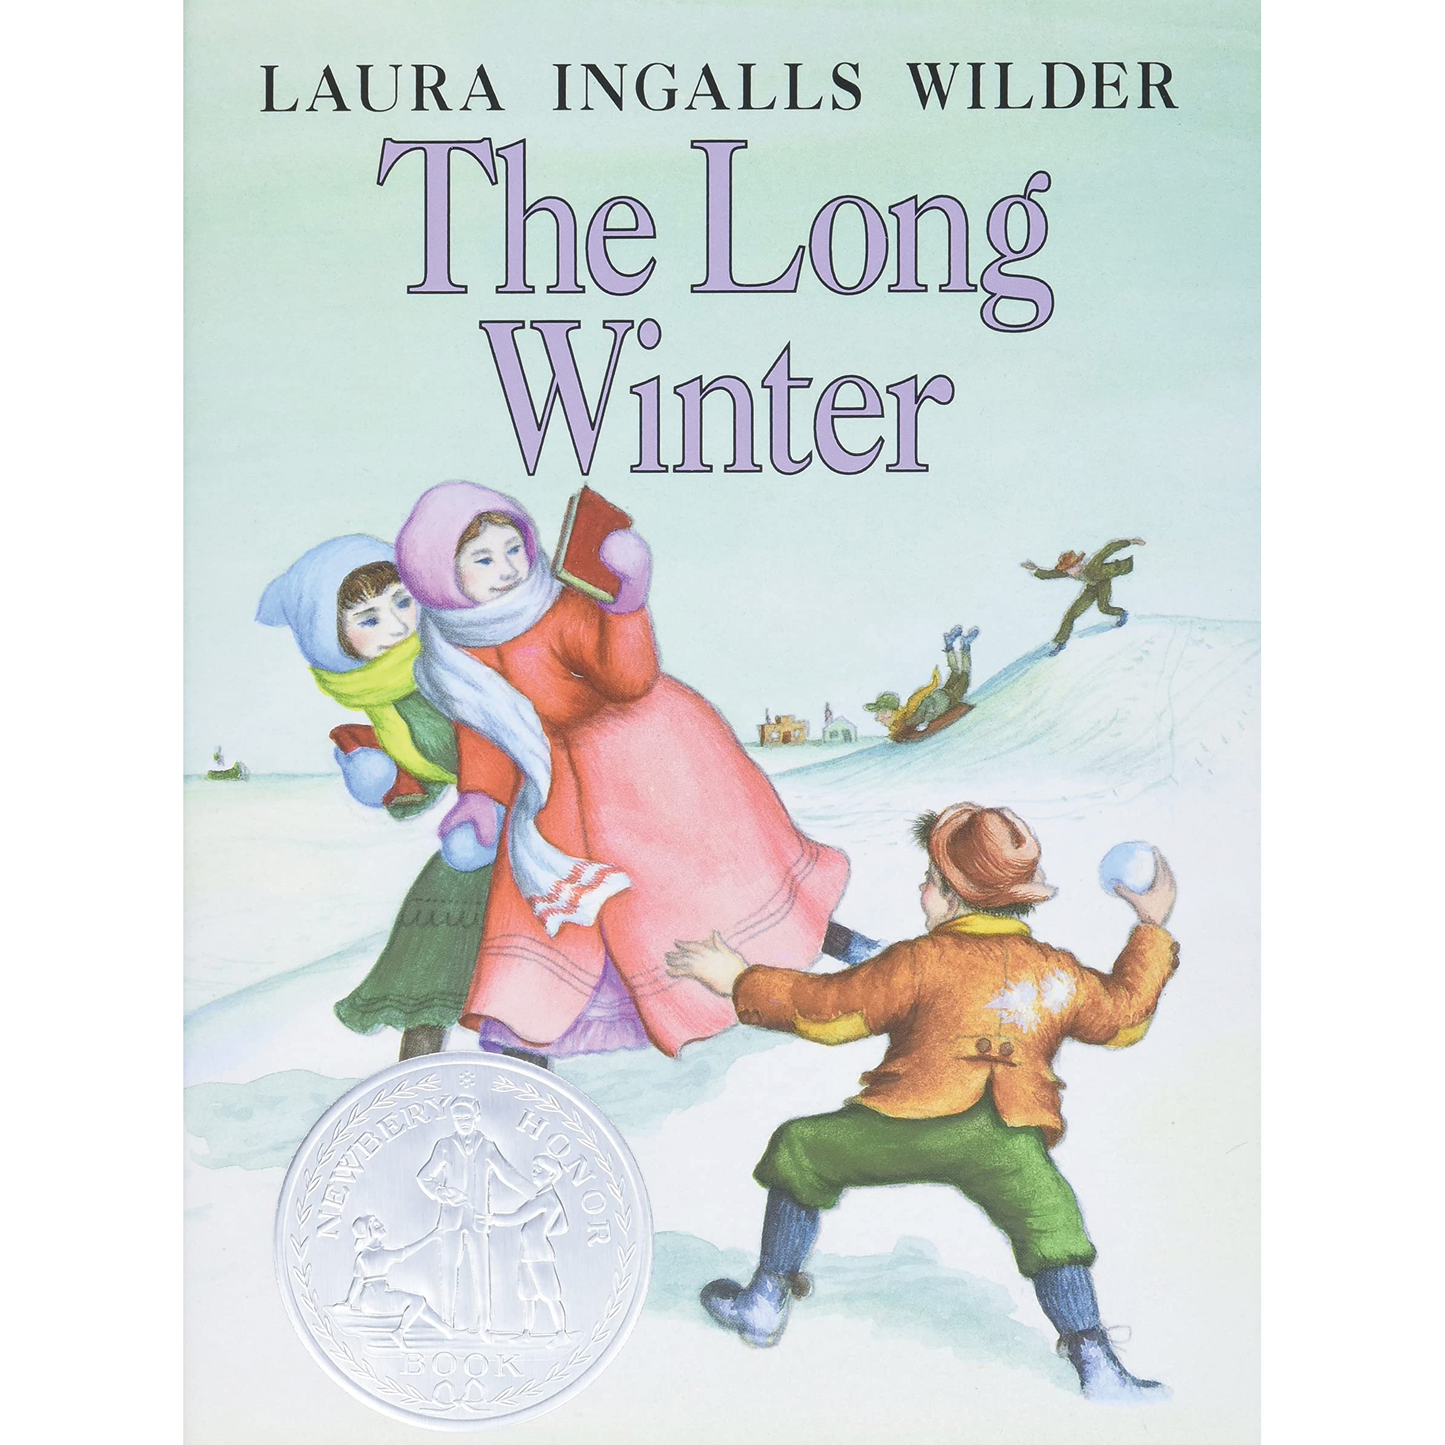 The Long Winter by Laura Ingalls Wilder (Little House Series, #6) Hardcover